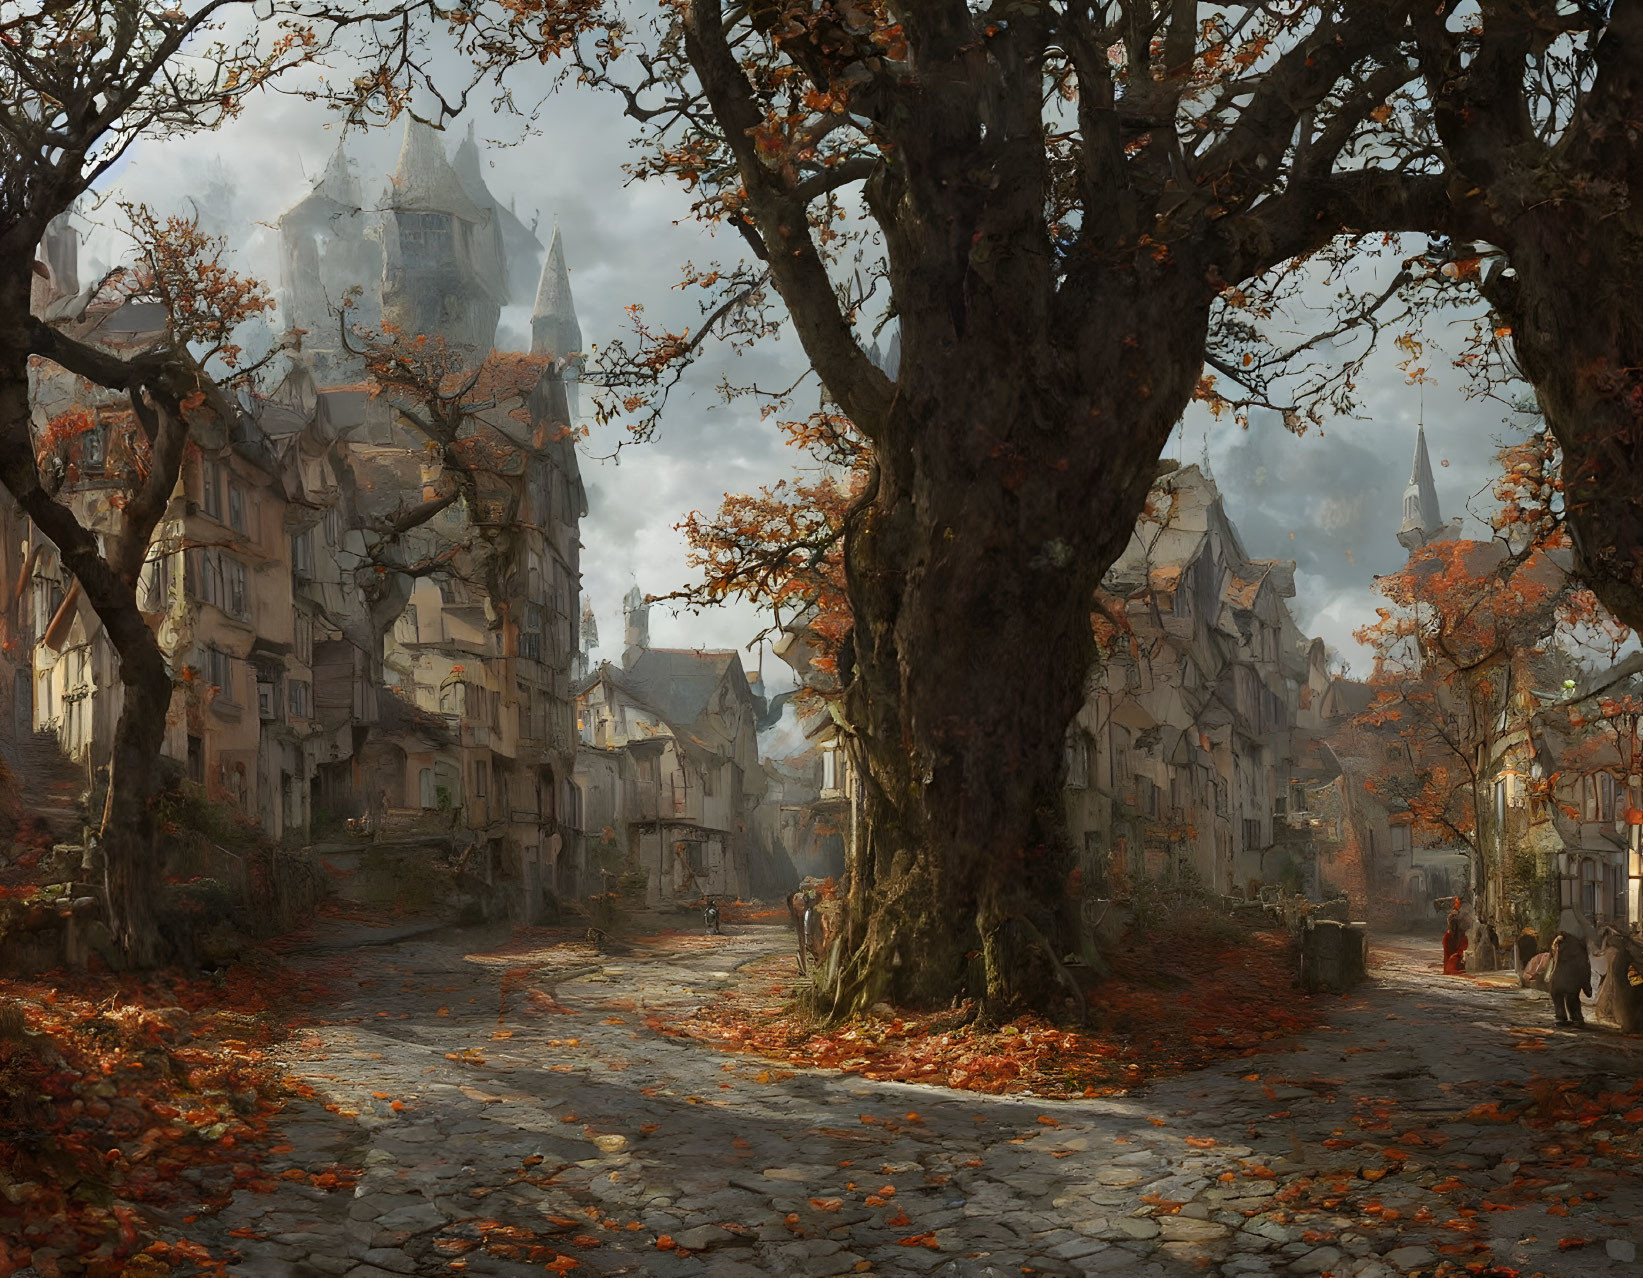 Medieval village street with cobblestone paths, autumnal trees, and quaint houses under a h